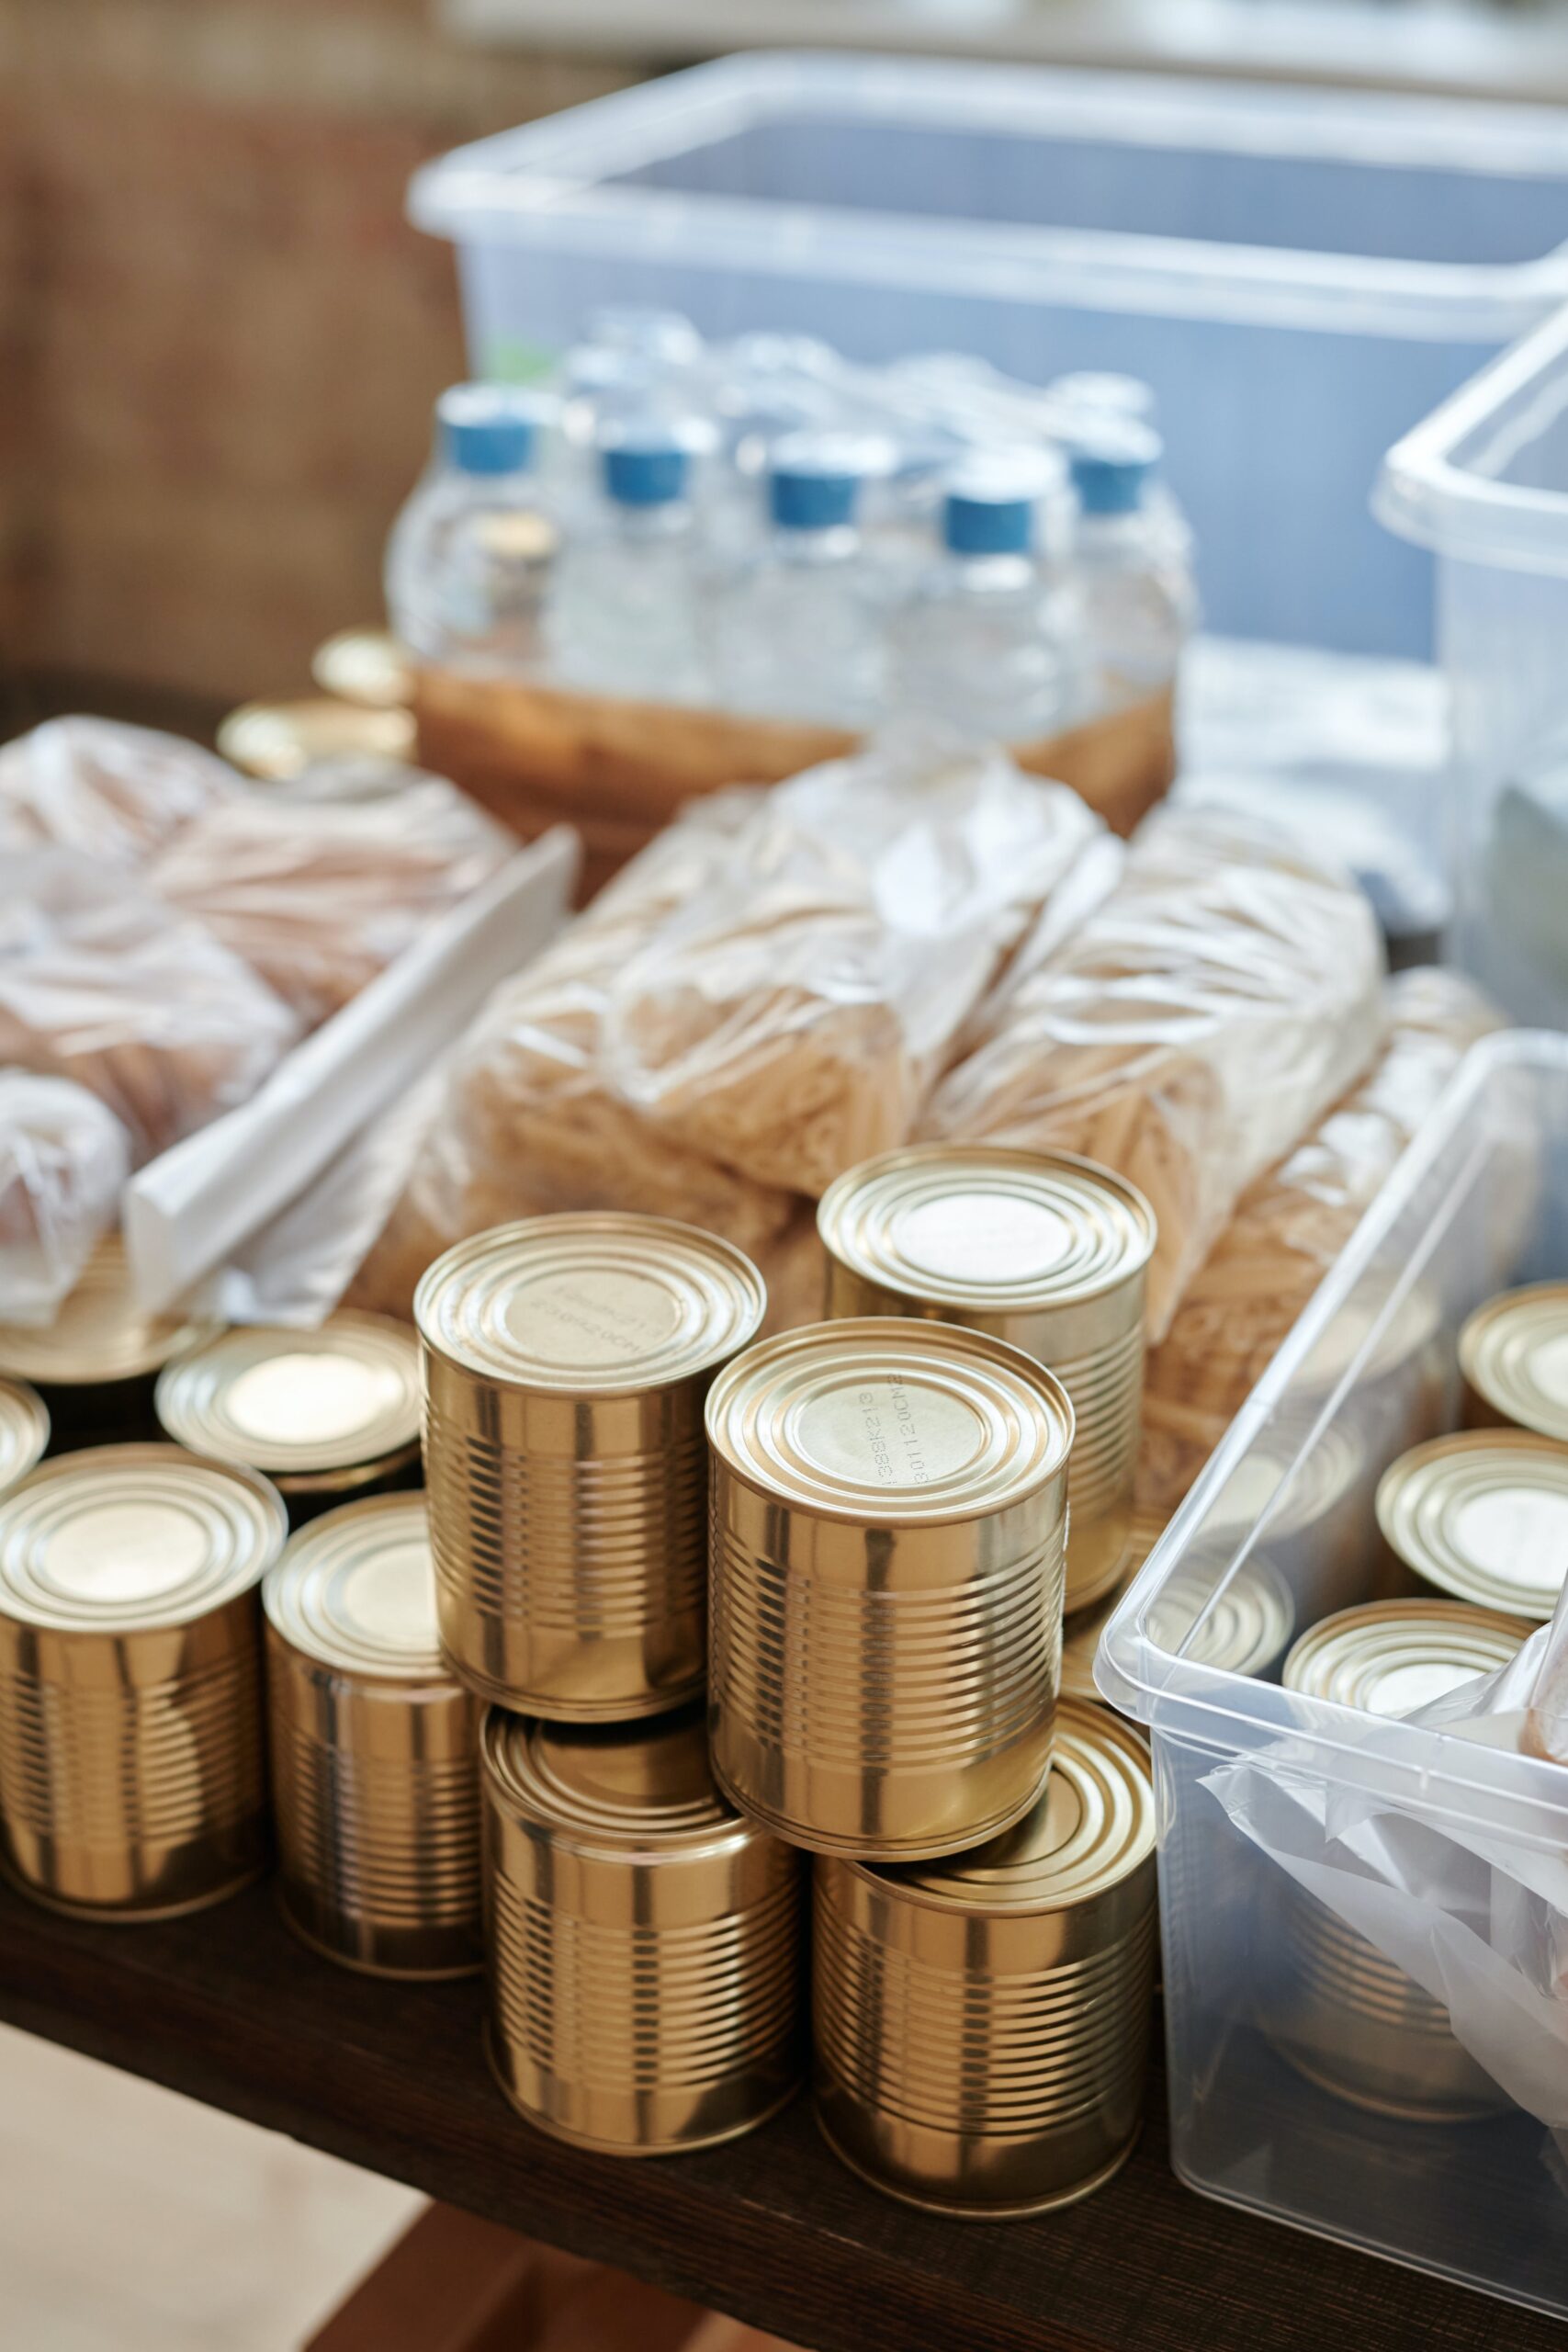 How to give back and do good for society. Image of canned goods and donated goods.